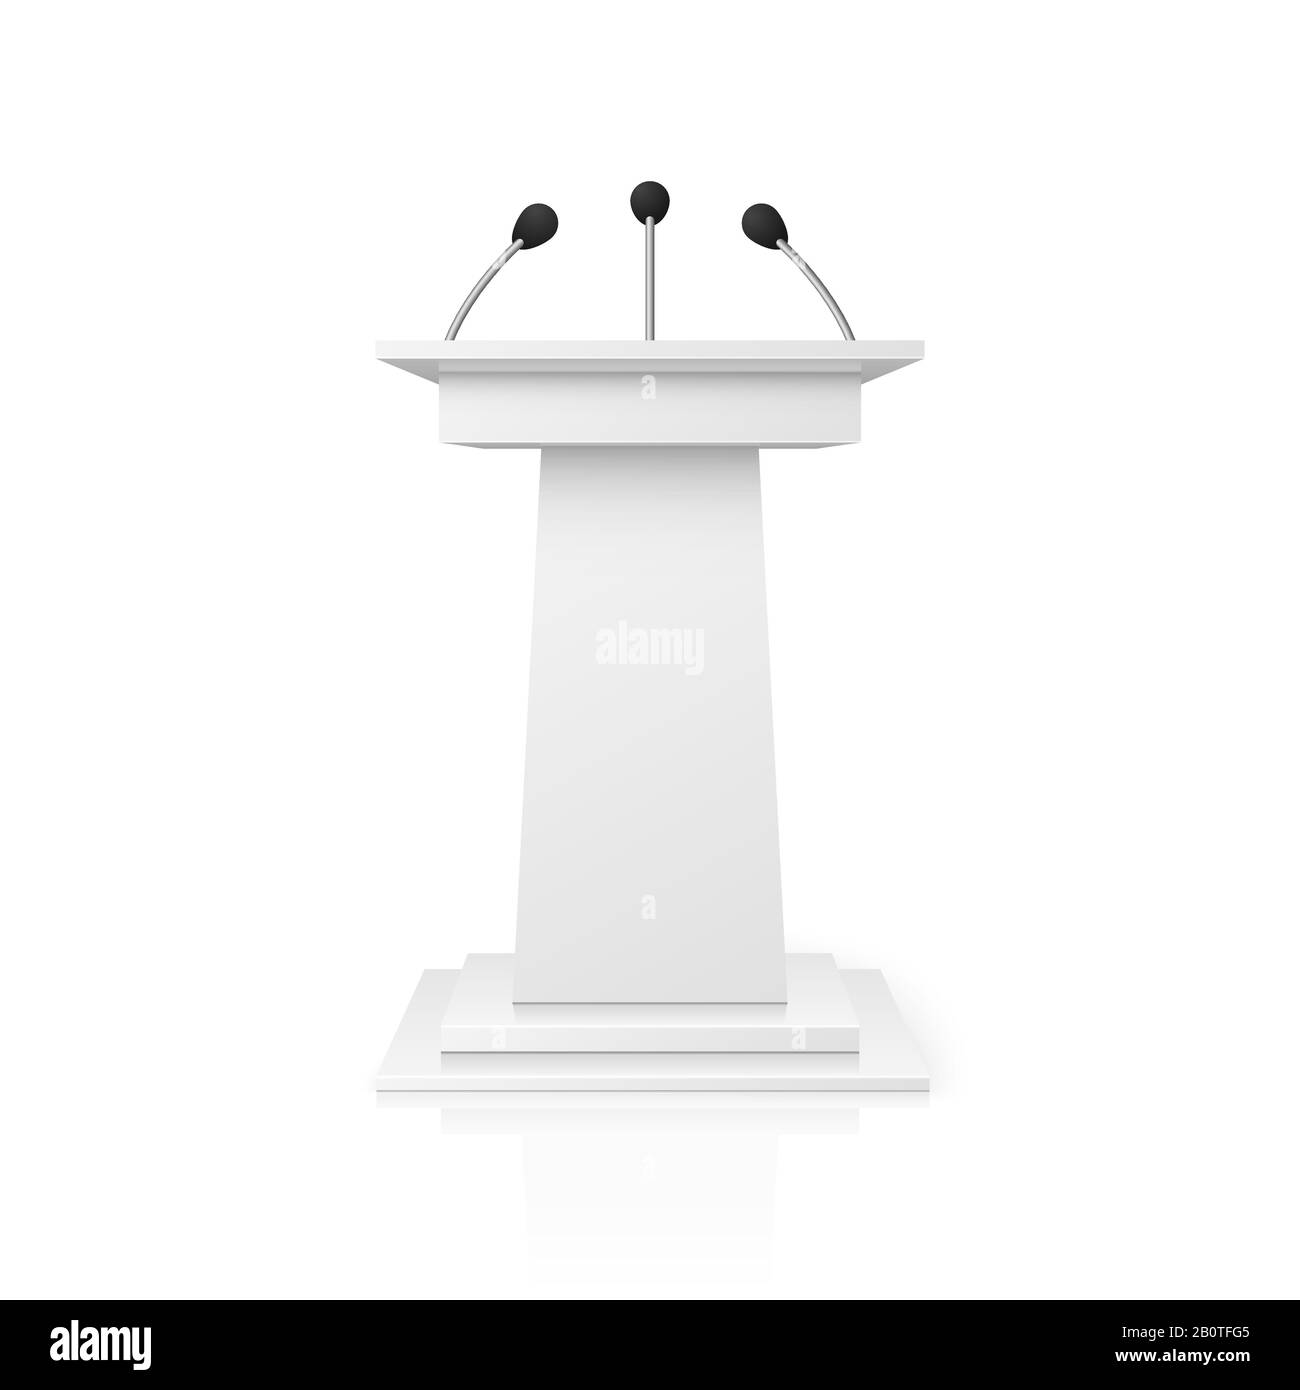 White empty podium tribune for public speech with microphones vector illustration. Pedestal lecture and public stand Stock Vector